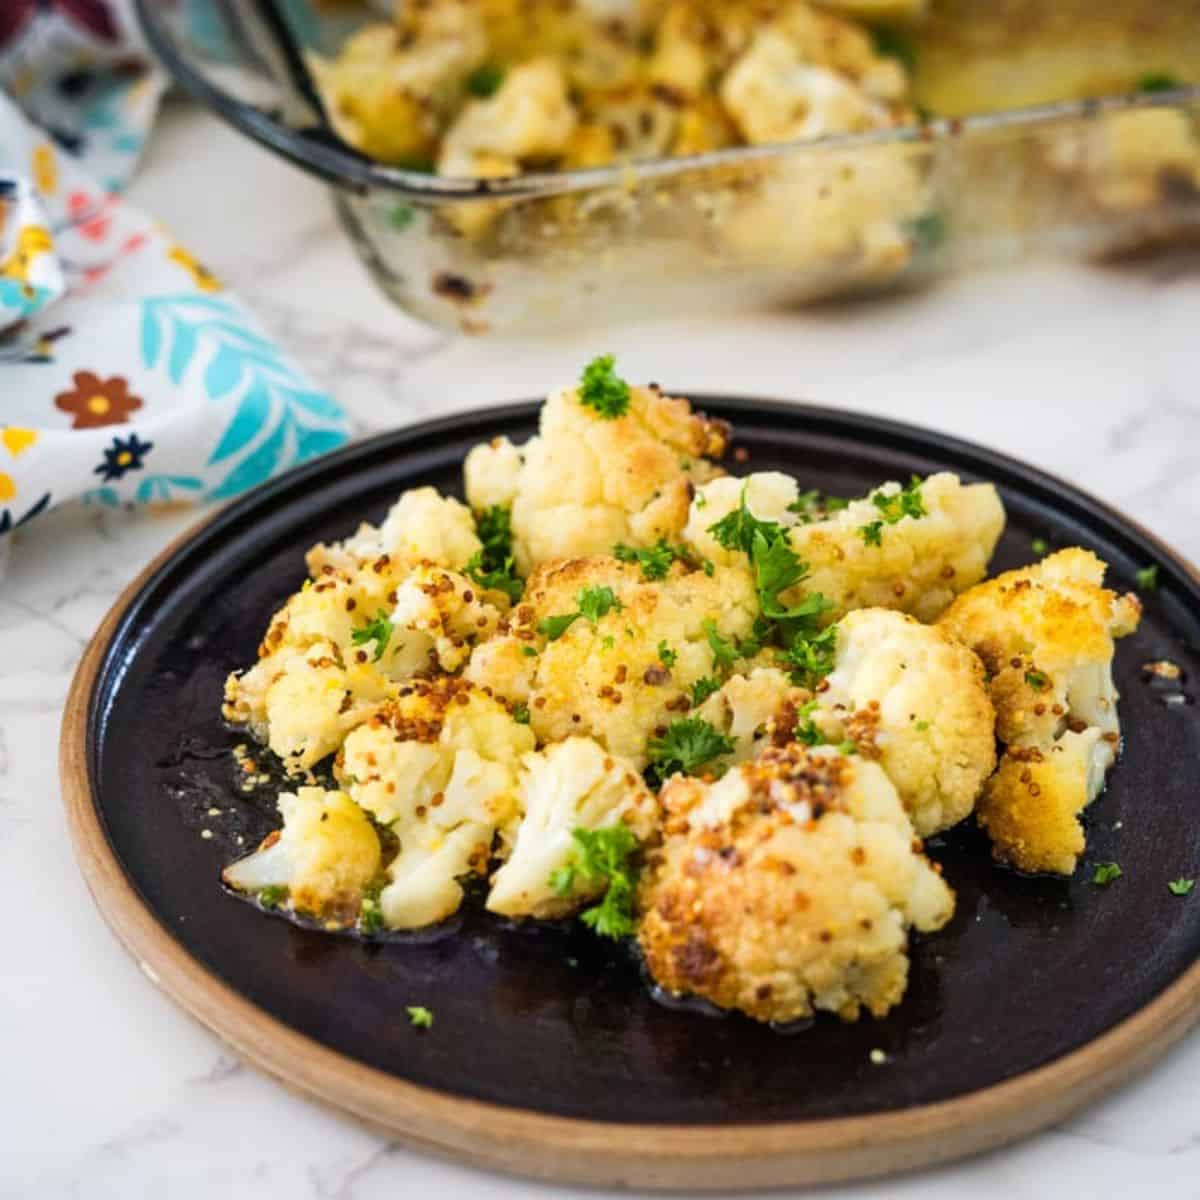 Keto roasted cauliflower on a black plate, garnished with parsley, with a glass baking dish in the background.